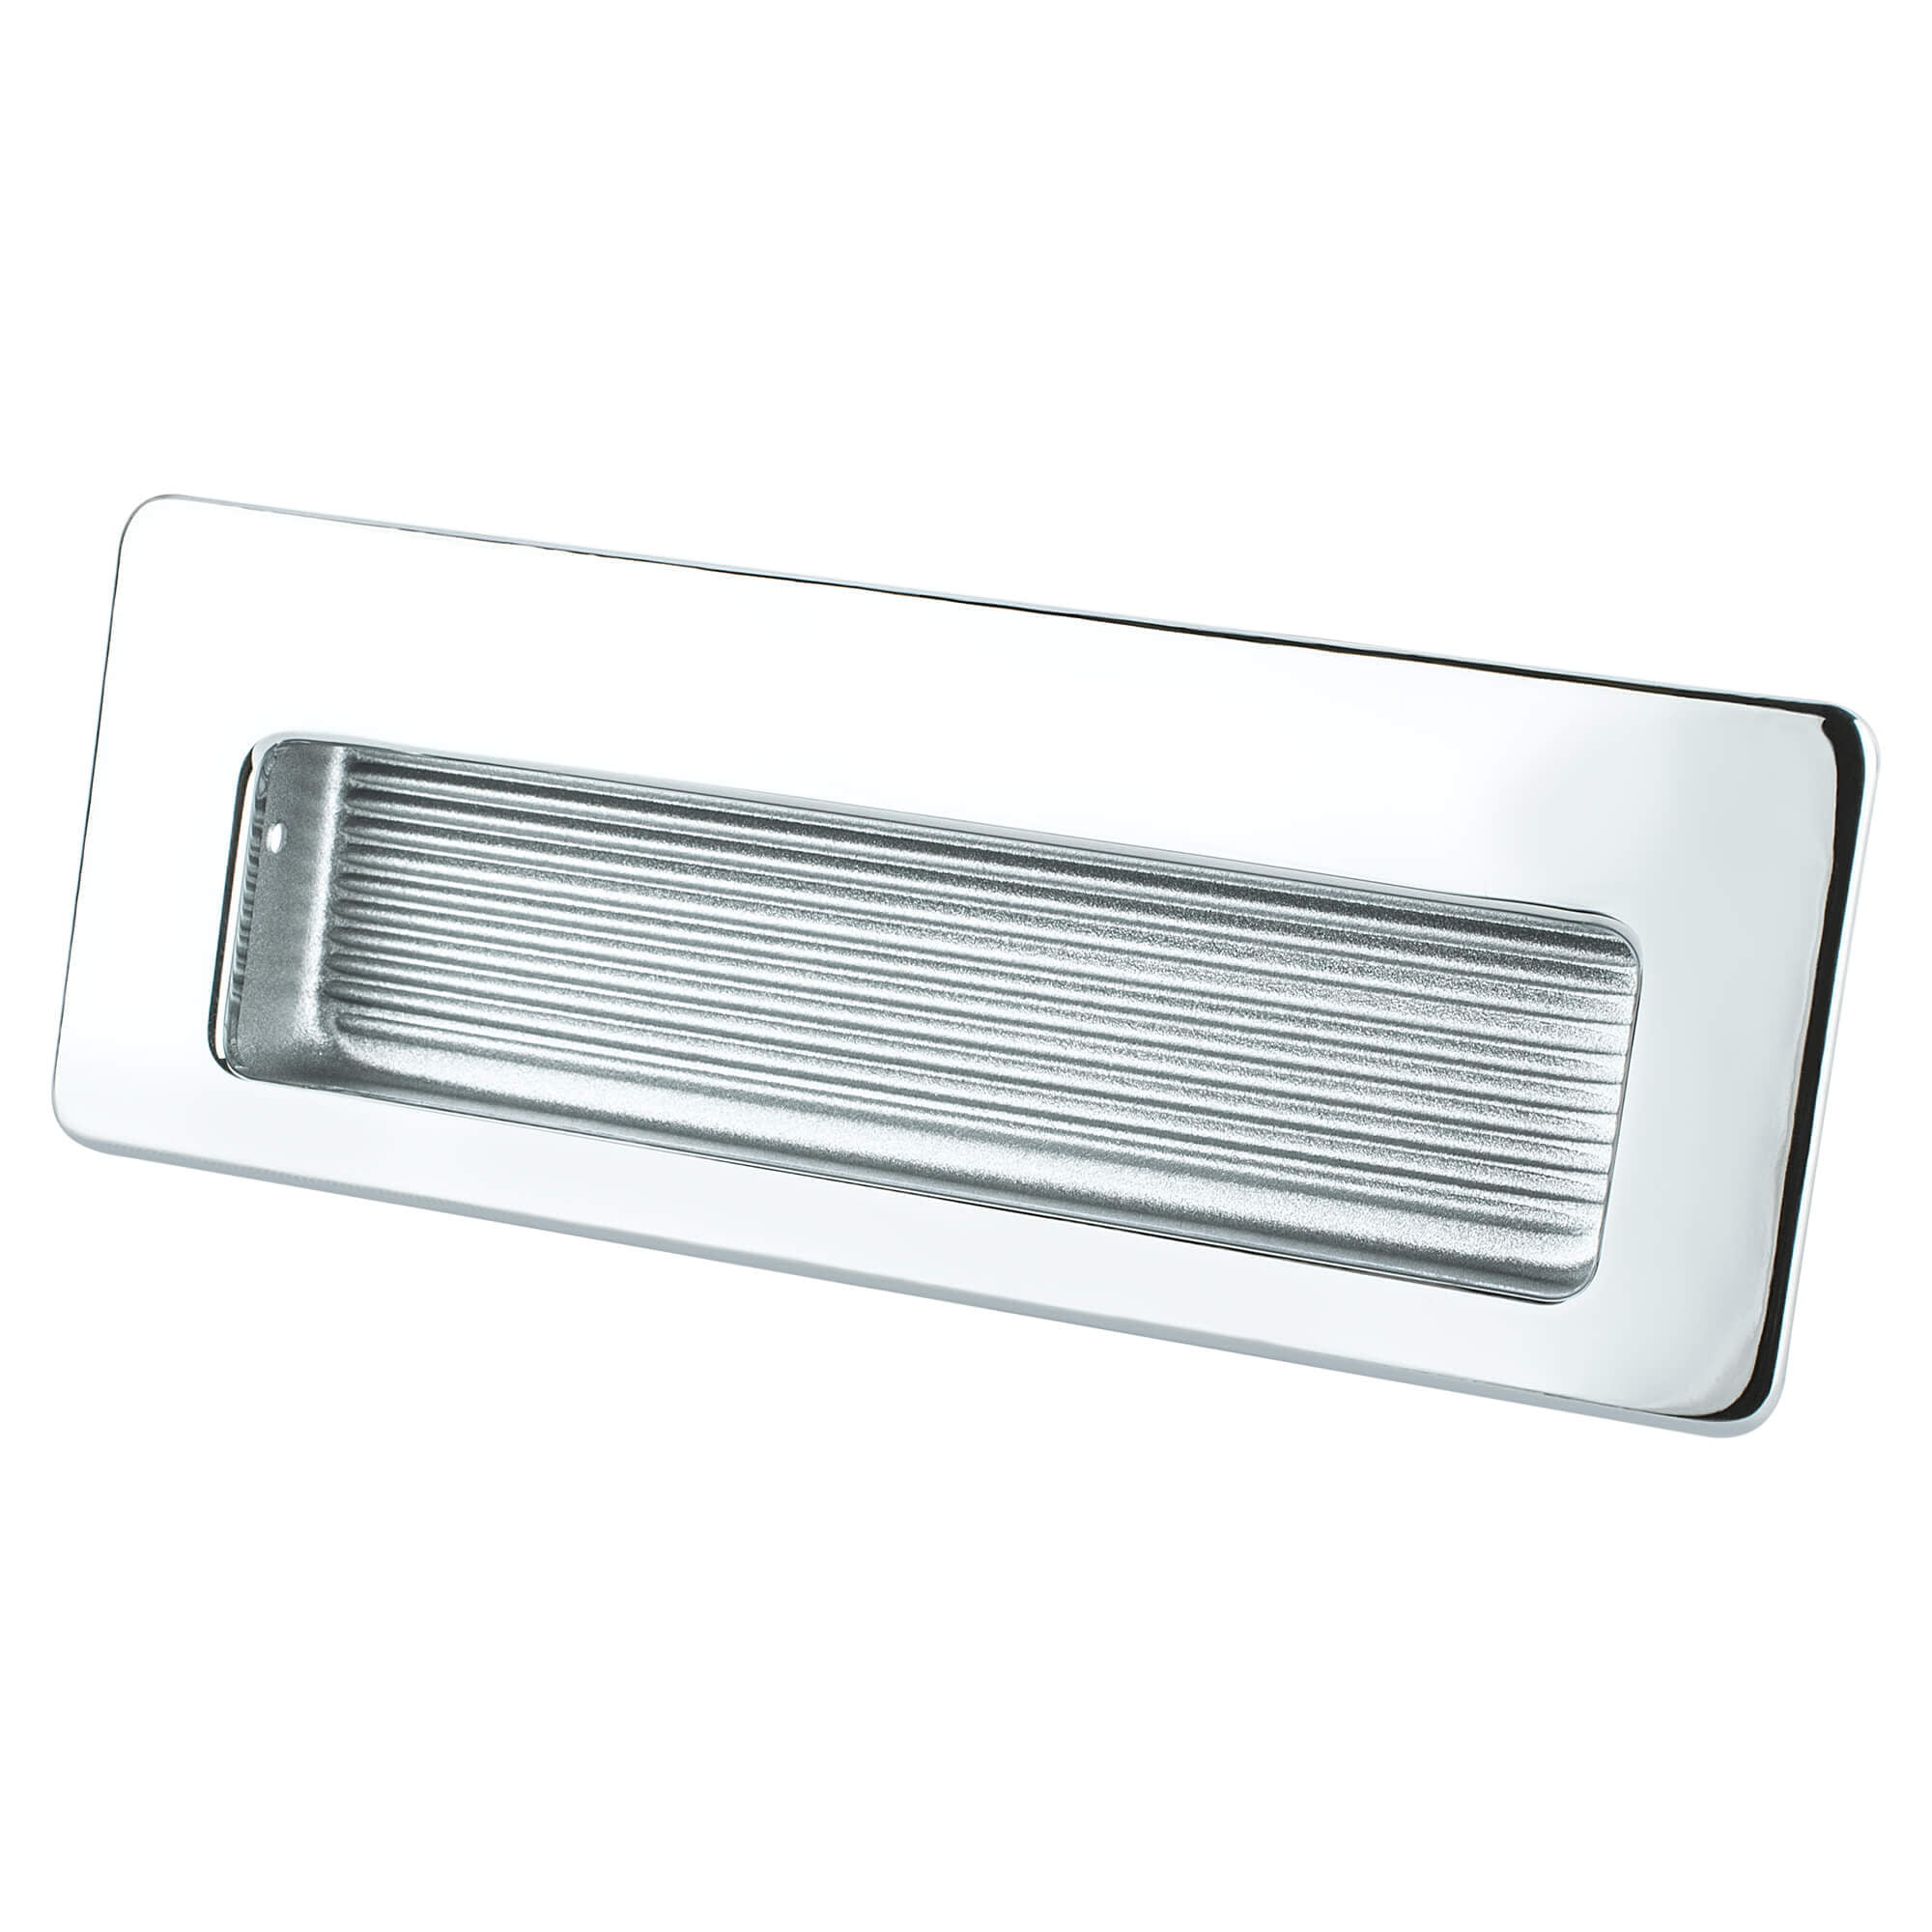 6692-126-b Zurich Recess Pull - Polished Chrome